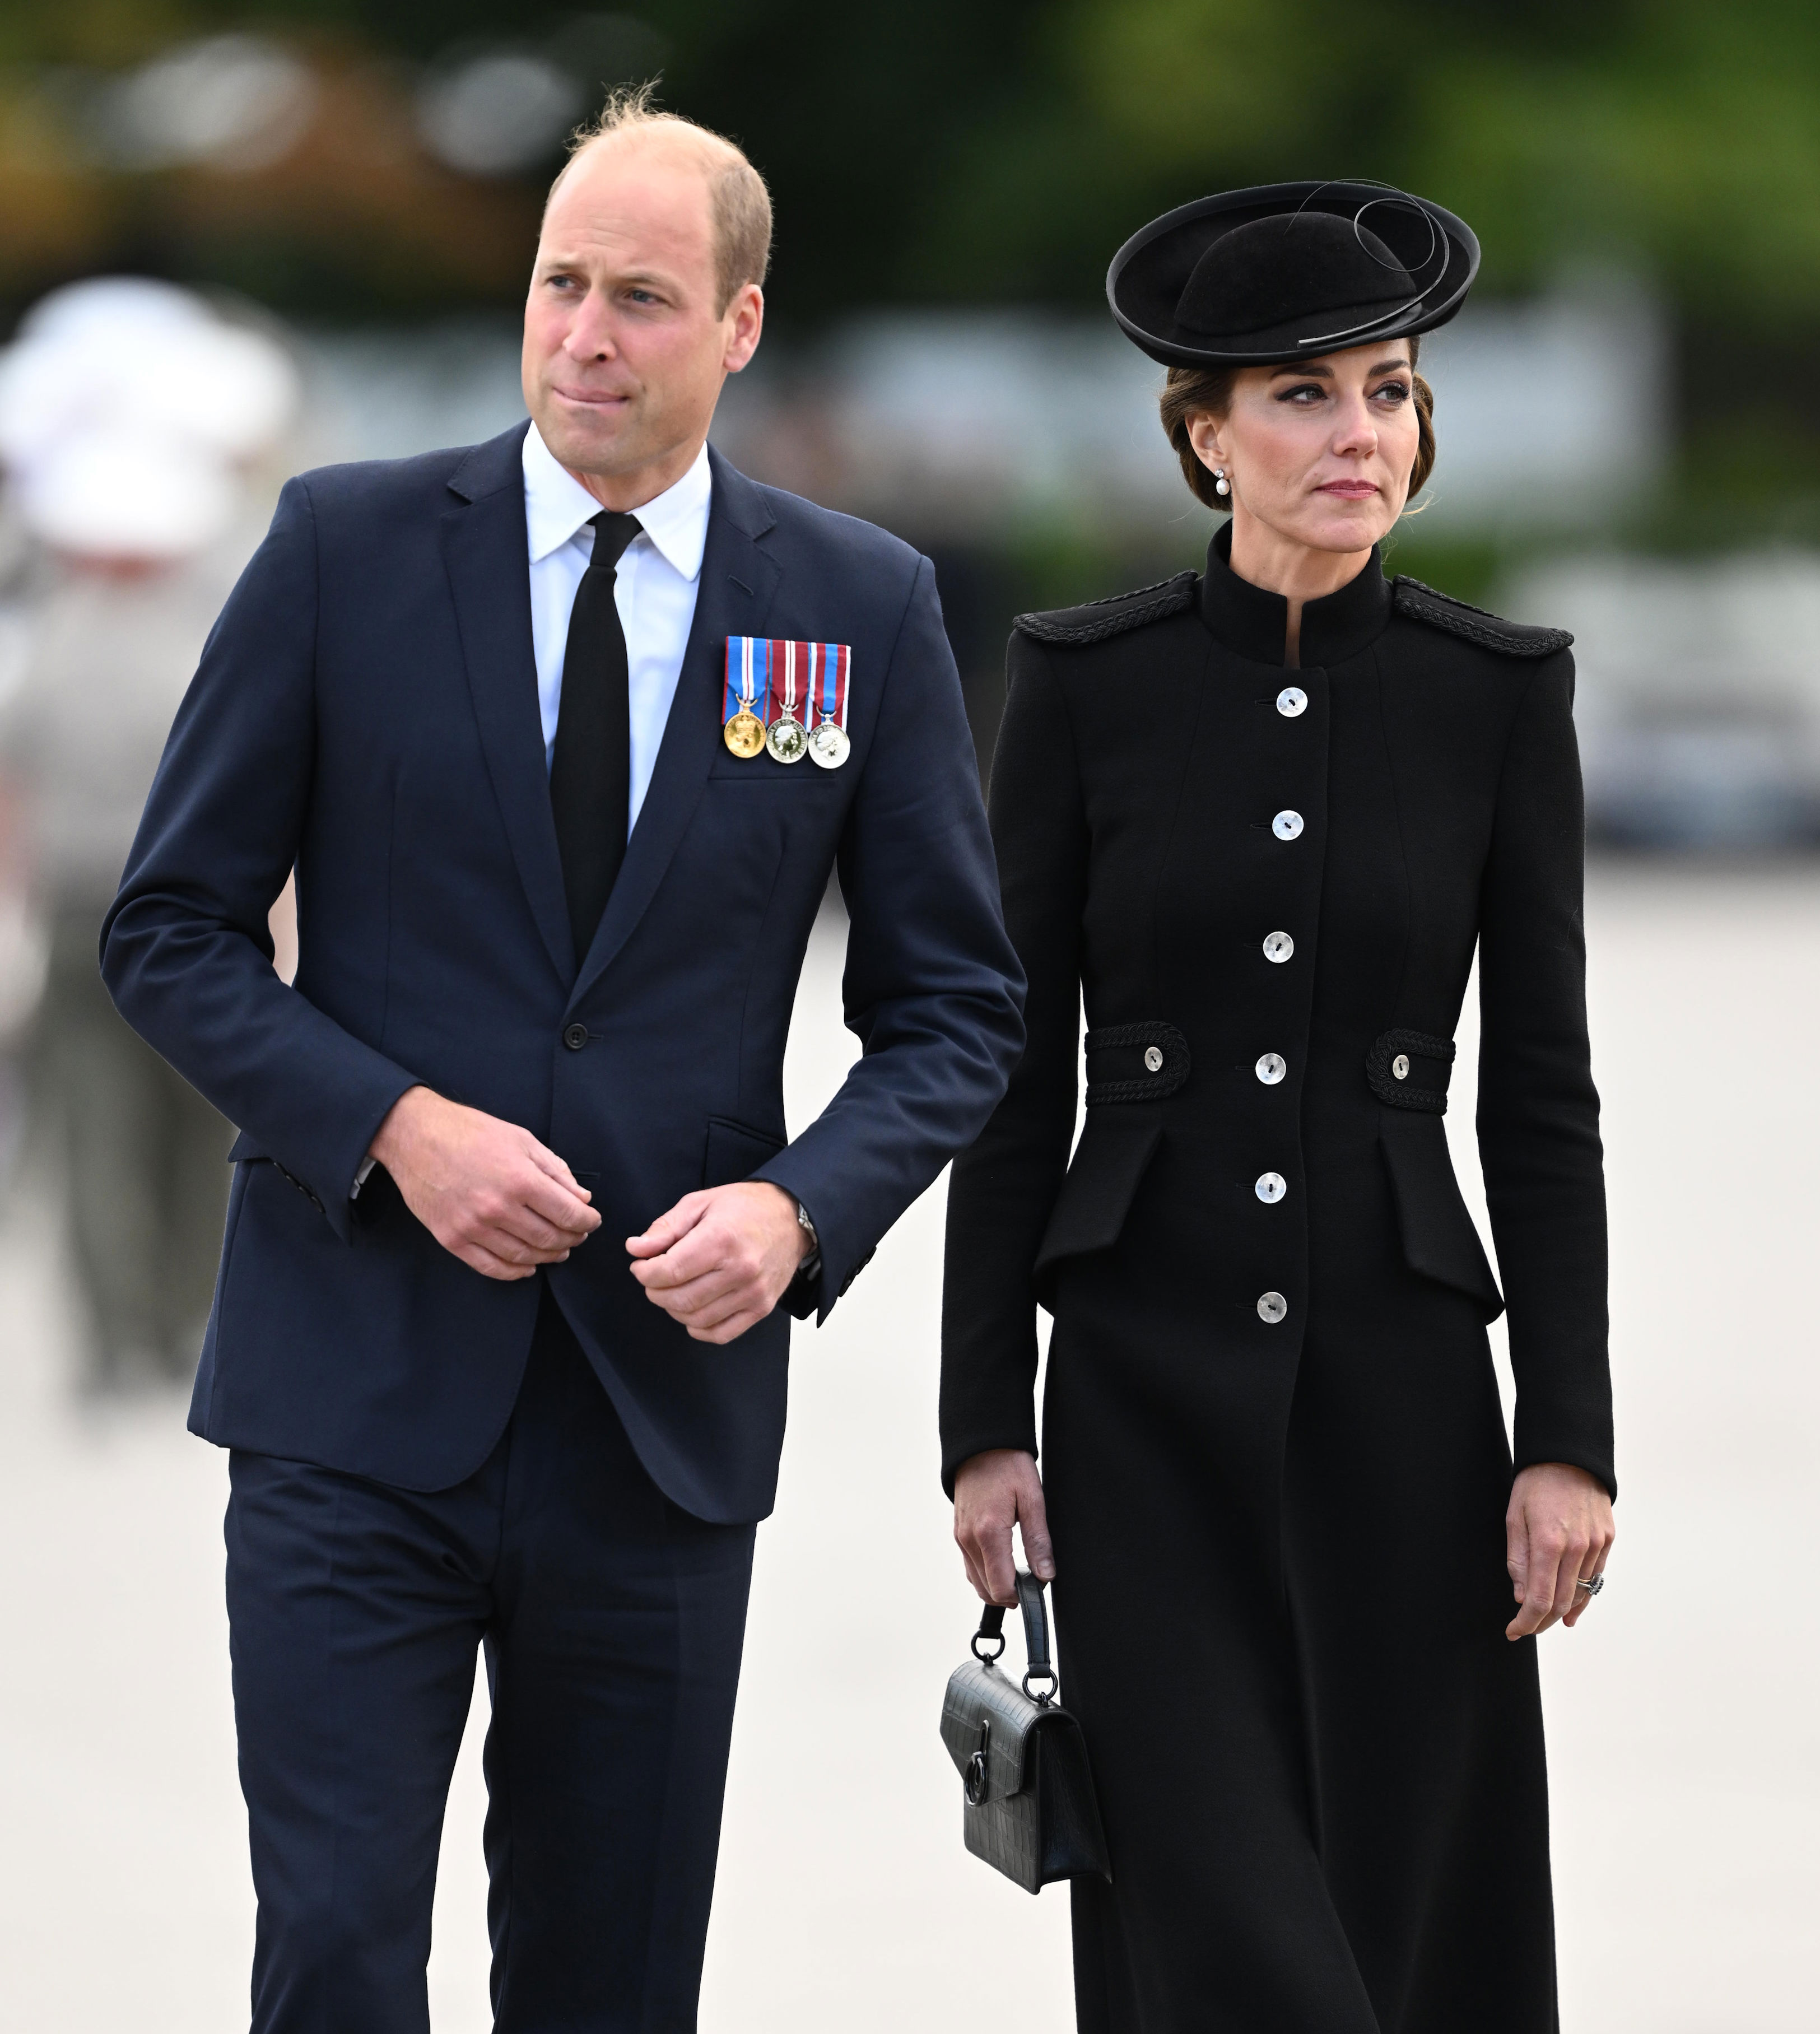 <p><a href="https://www.wonderwall.com/celebrity/profiles/overview/prince-william-482.article">Prince William</a> and Princess Kate met Australian, Canadian and New Zealand troops during a visit to ATC Pirbright, an army training center in Guildford, England, on Sept. 16, 2022. The couple spoke with troops from the Commonwealth who have been deployed to the U.K. to take part in the state funeral of Queen Elizabeth II and to thank them all for the part they are playing in marking the death of Her Majesty.</p>